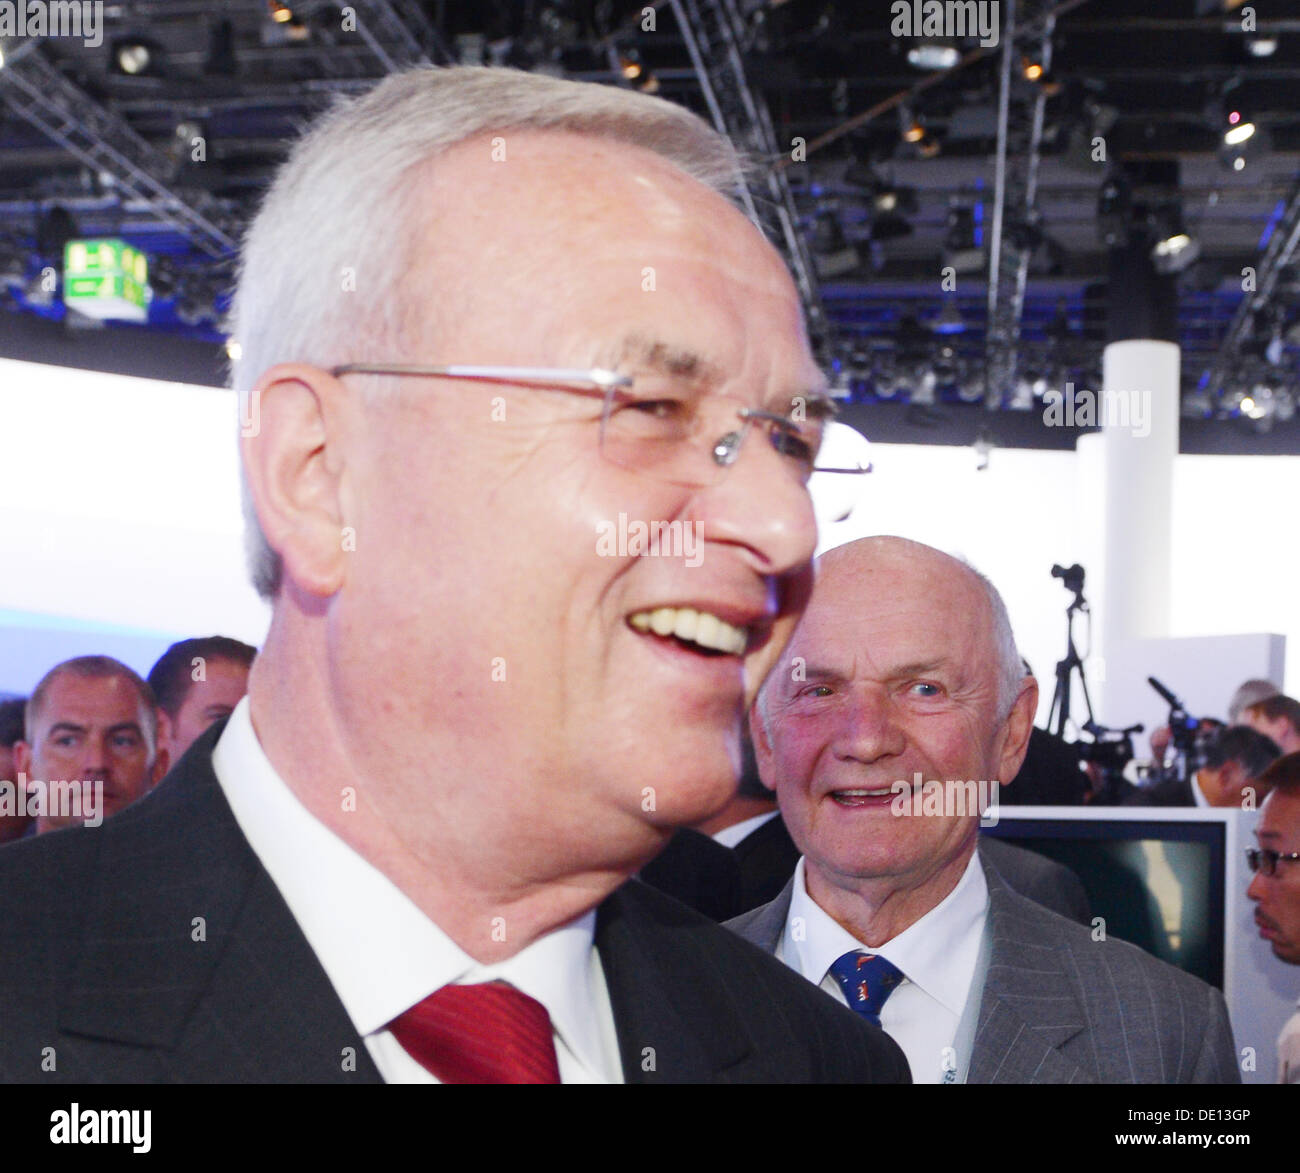 Frankfurt Main, Germany. 09th Sep, 2013. CEO of car manufacturer Volkswagen (VW), Martin Winterkorn (L) and chairman of the supervisory board of VW, Ferdinand Piech stand at the exhibition booth of Volkswagen AG at the press day of the Frankfurt Motor Show (IAA) in Frankfurt Main, Germany, 09 September 2013. Almost 1100 exhibitors will present their novelties at the automotive trade show from 12 till 22 September 2013. Photo: ULI DECK/dpa/Alamy Live News Stock Photo